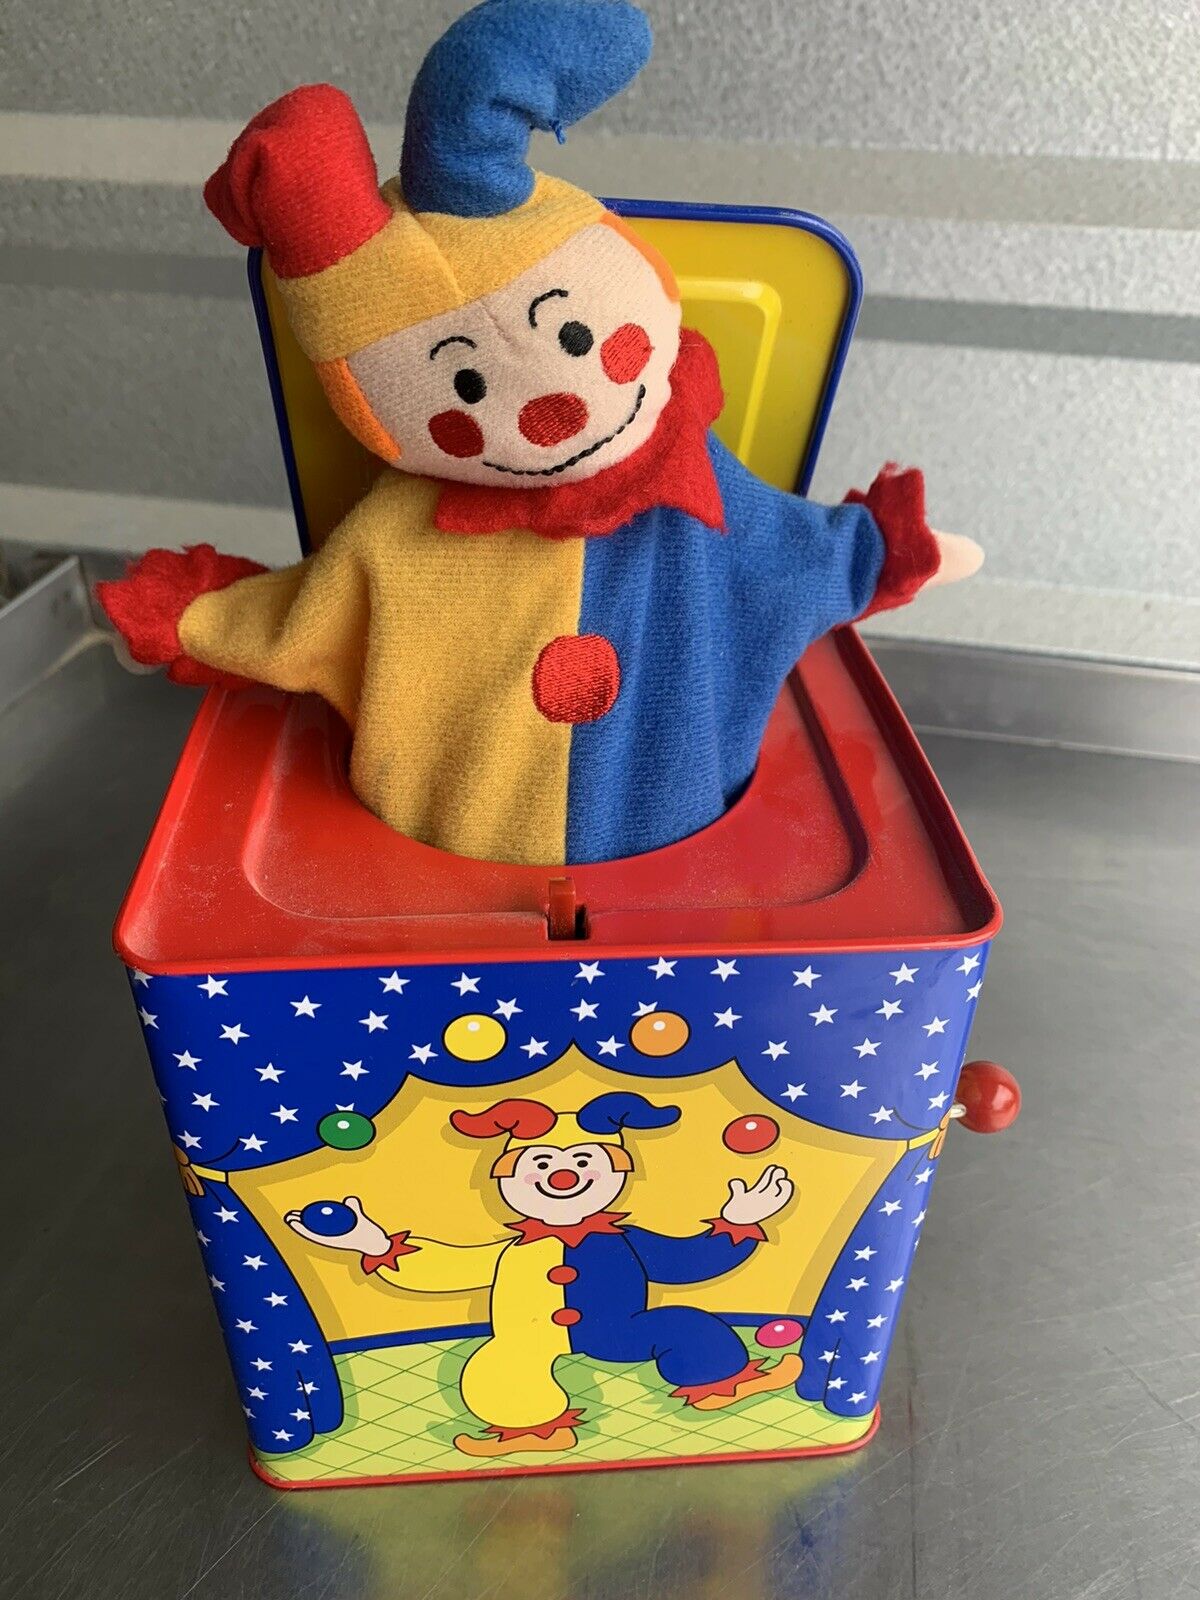 Schylling-silly-circus-jack-in-the-box-musical-children-toy-clown